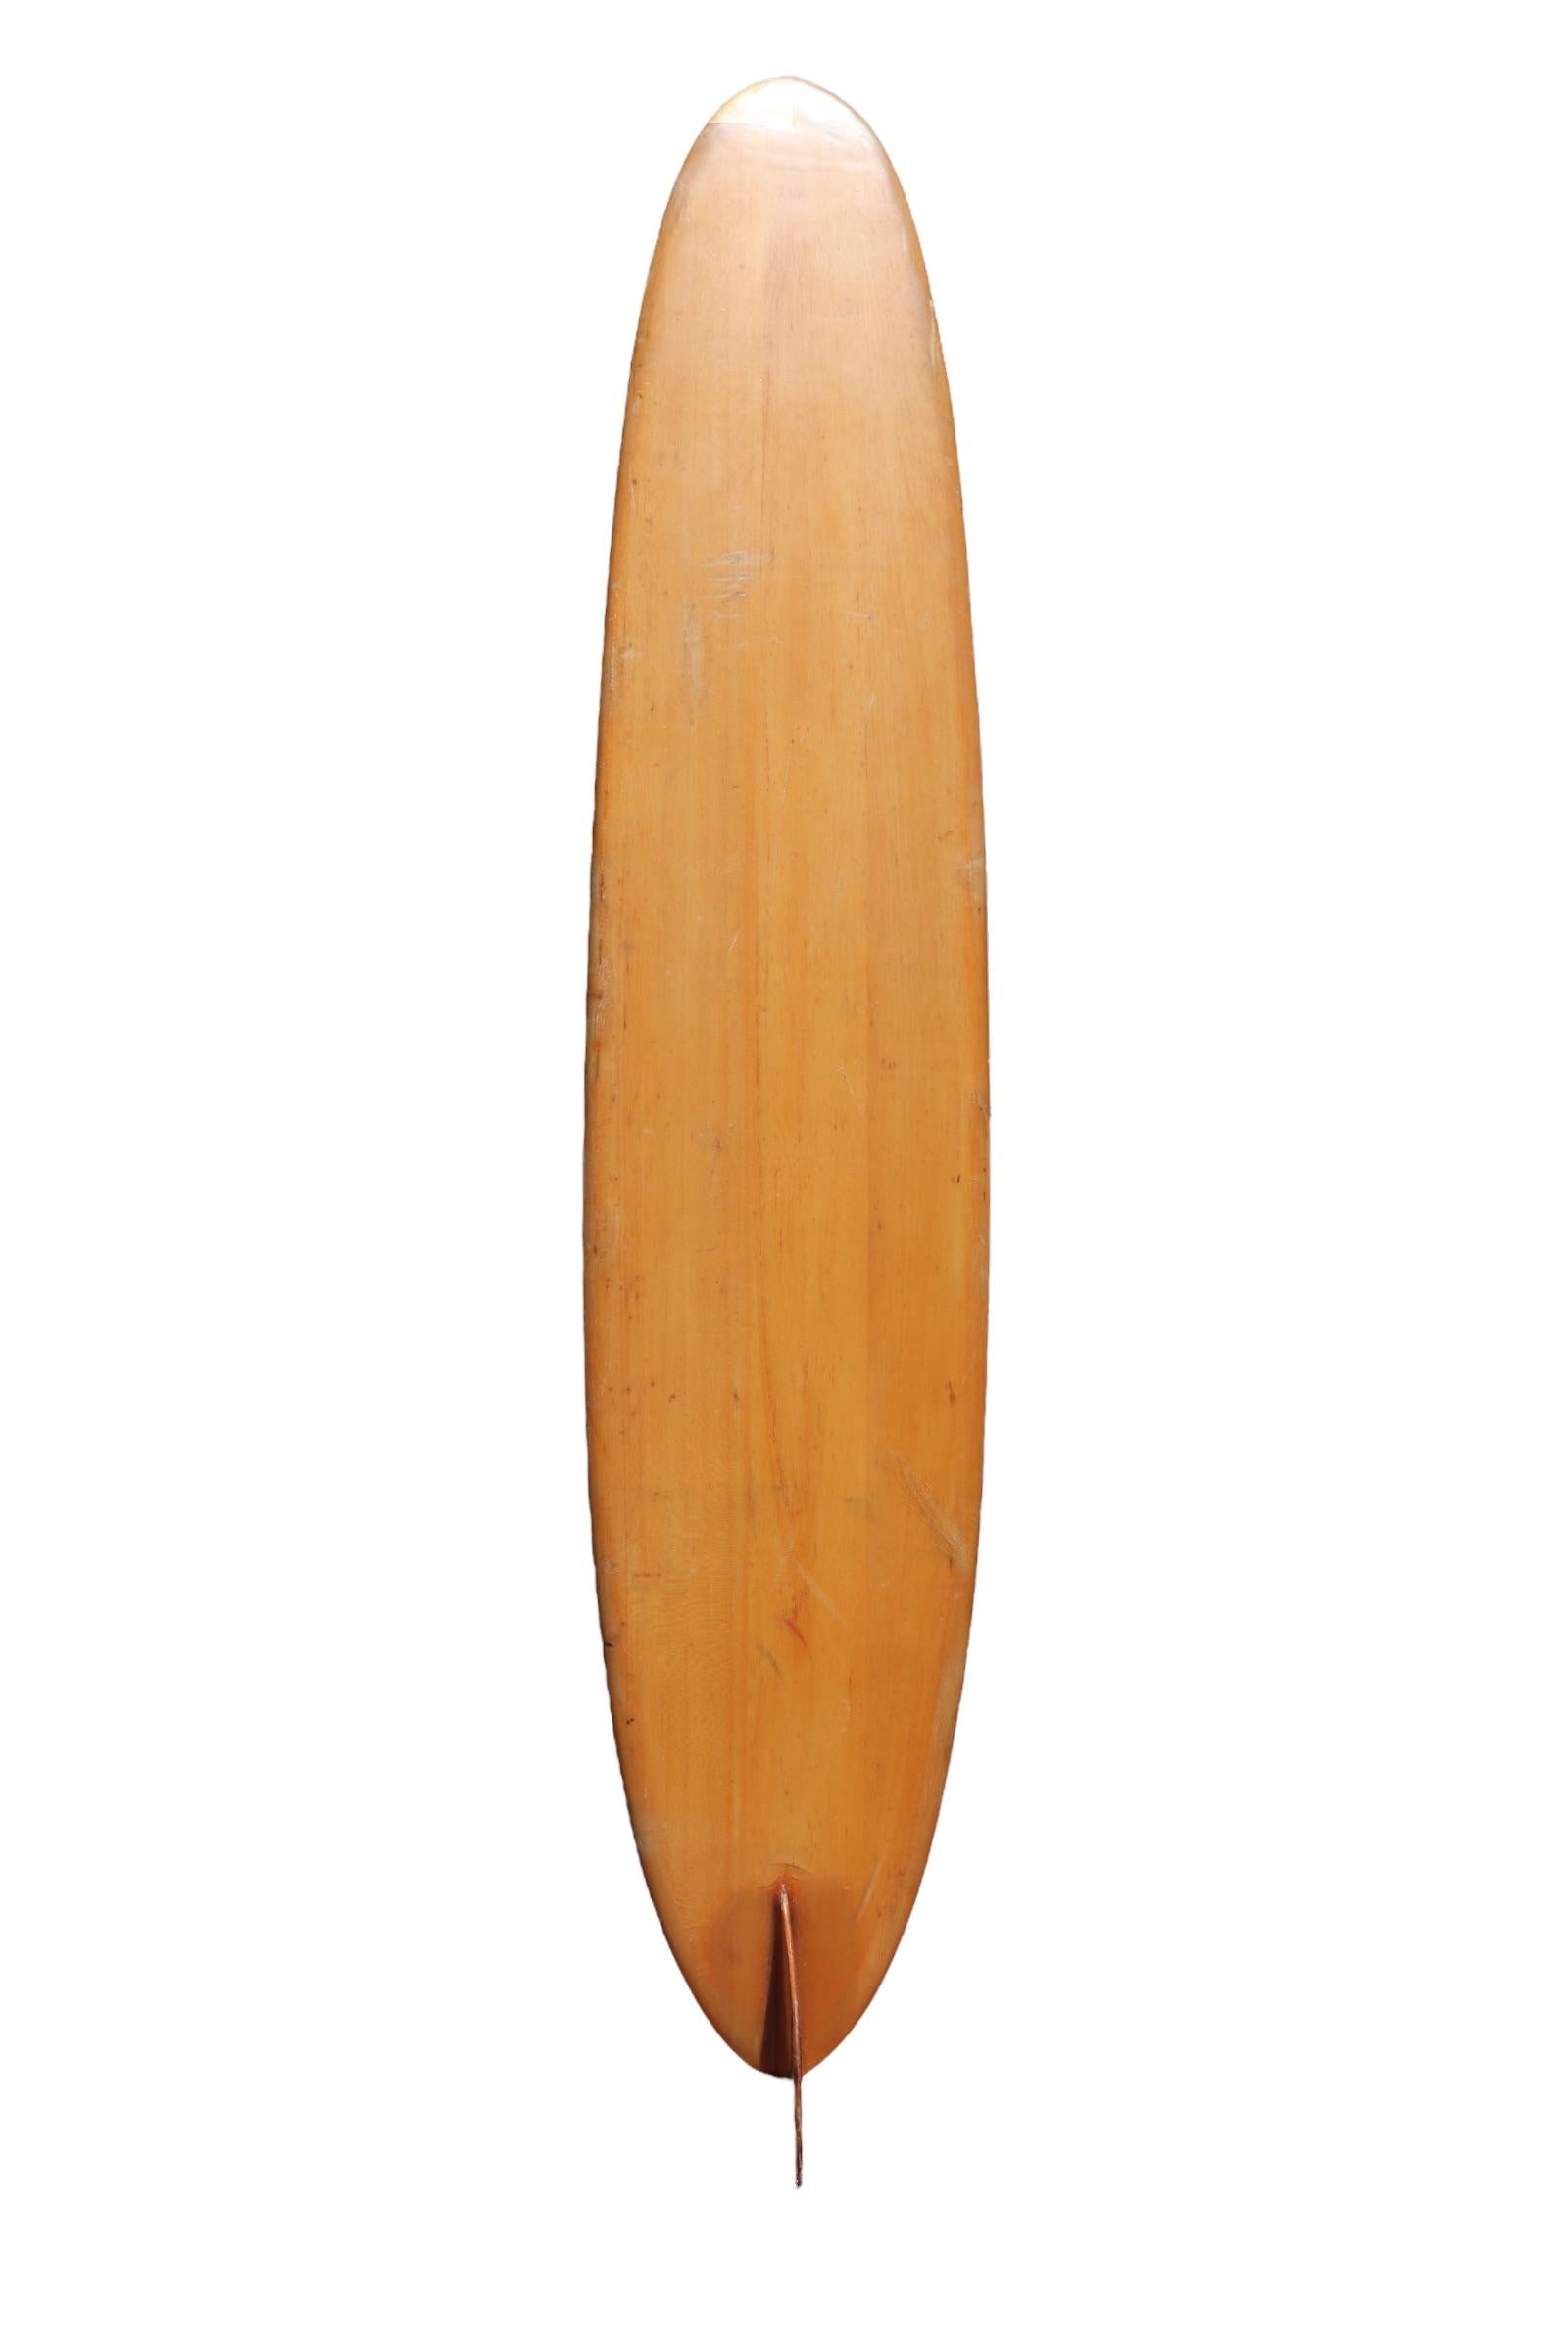 1958 Velzy Jacobs wooden balsa surfboard. Features the short lived “Surfboards by Velzy and Jacobs” laminate which was only used in the mid-late 1950s. The late Hap Jacobs (1930-2021) and the late Dale Velzy (1927-2005) joined forces in Venice